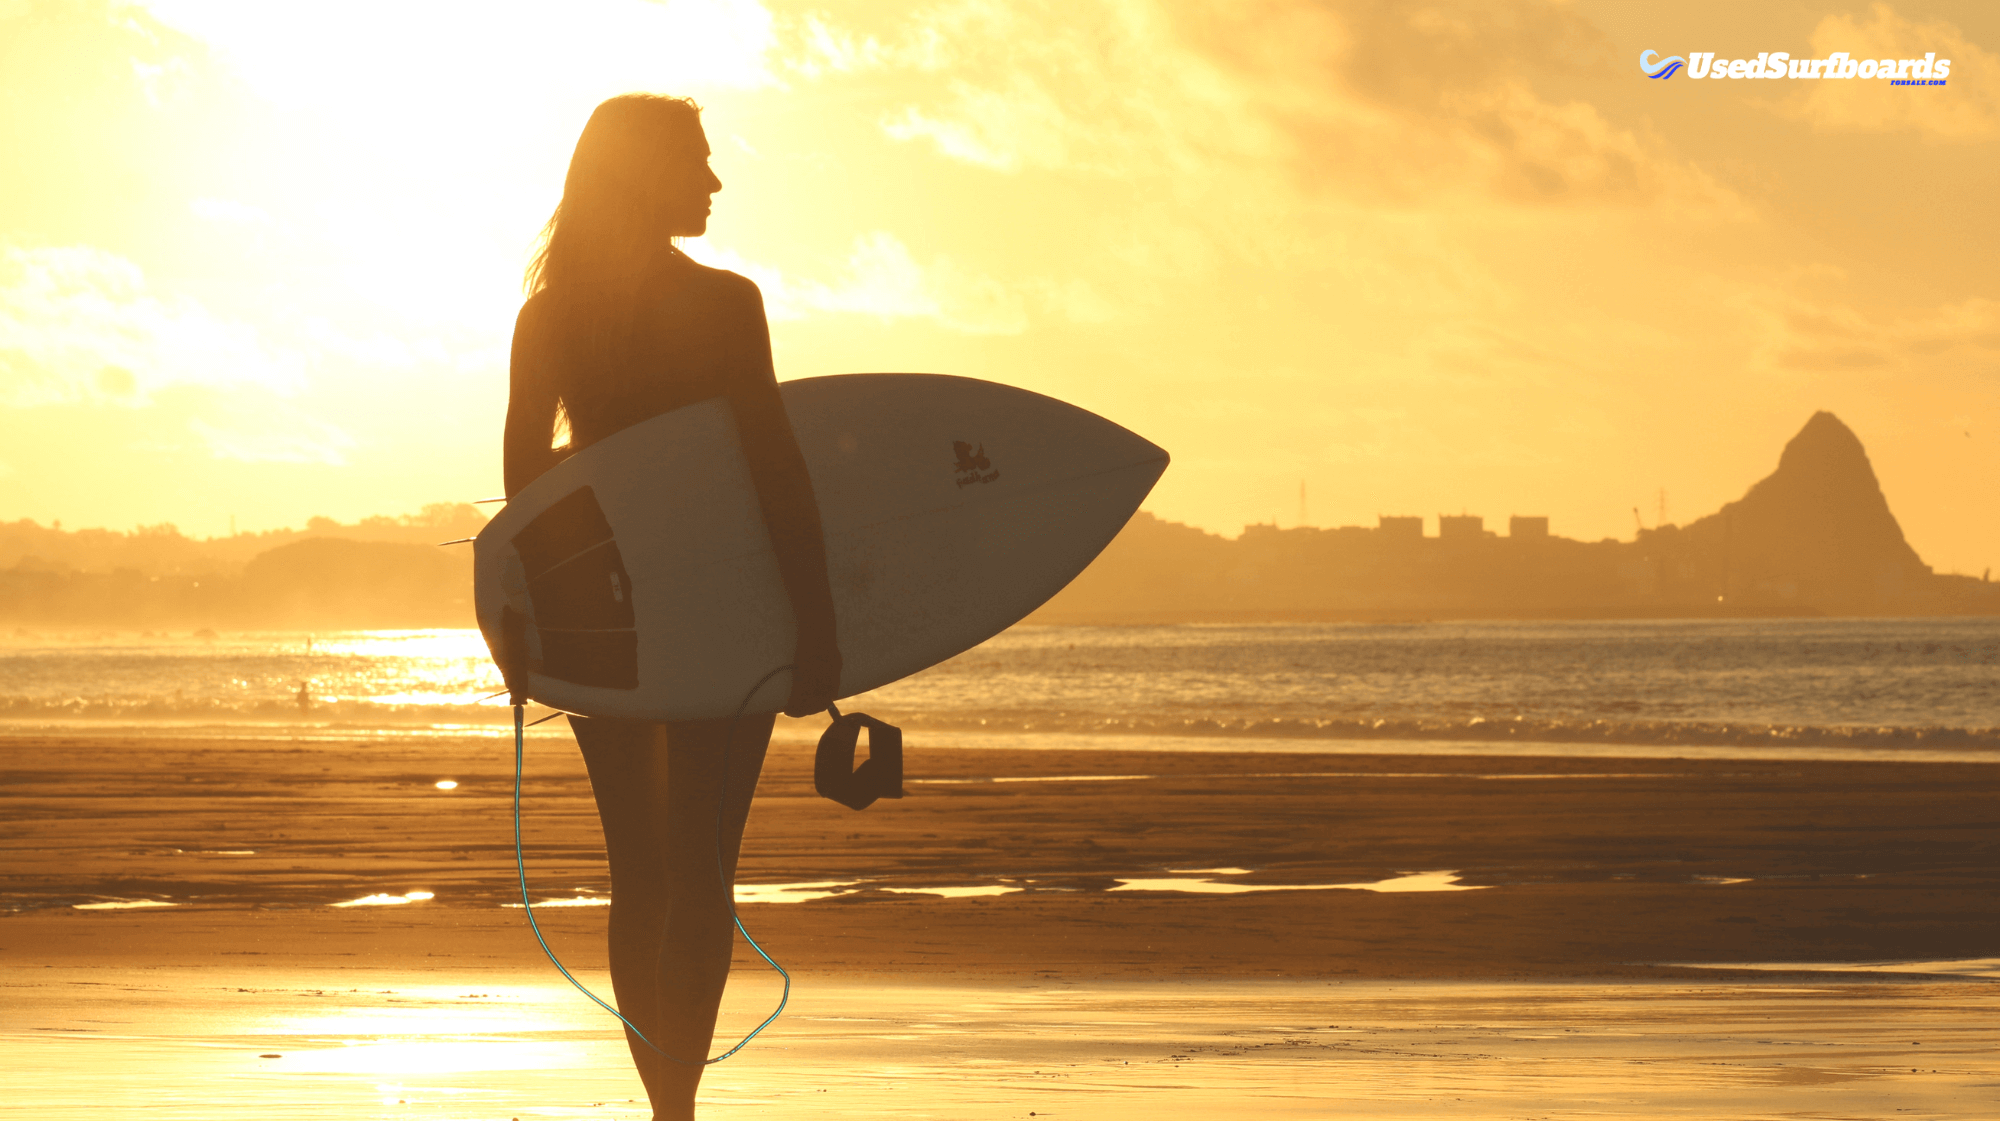 What is a Mini Simmons Surfboard?